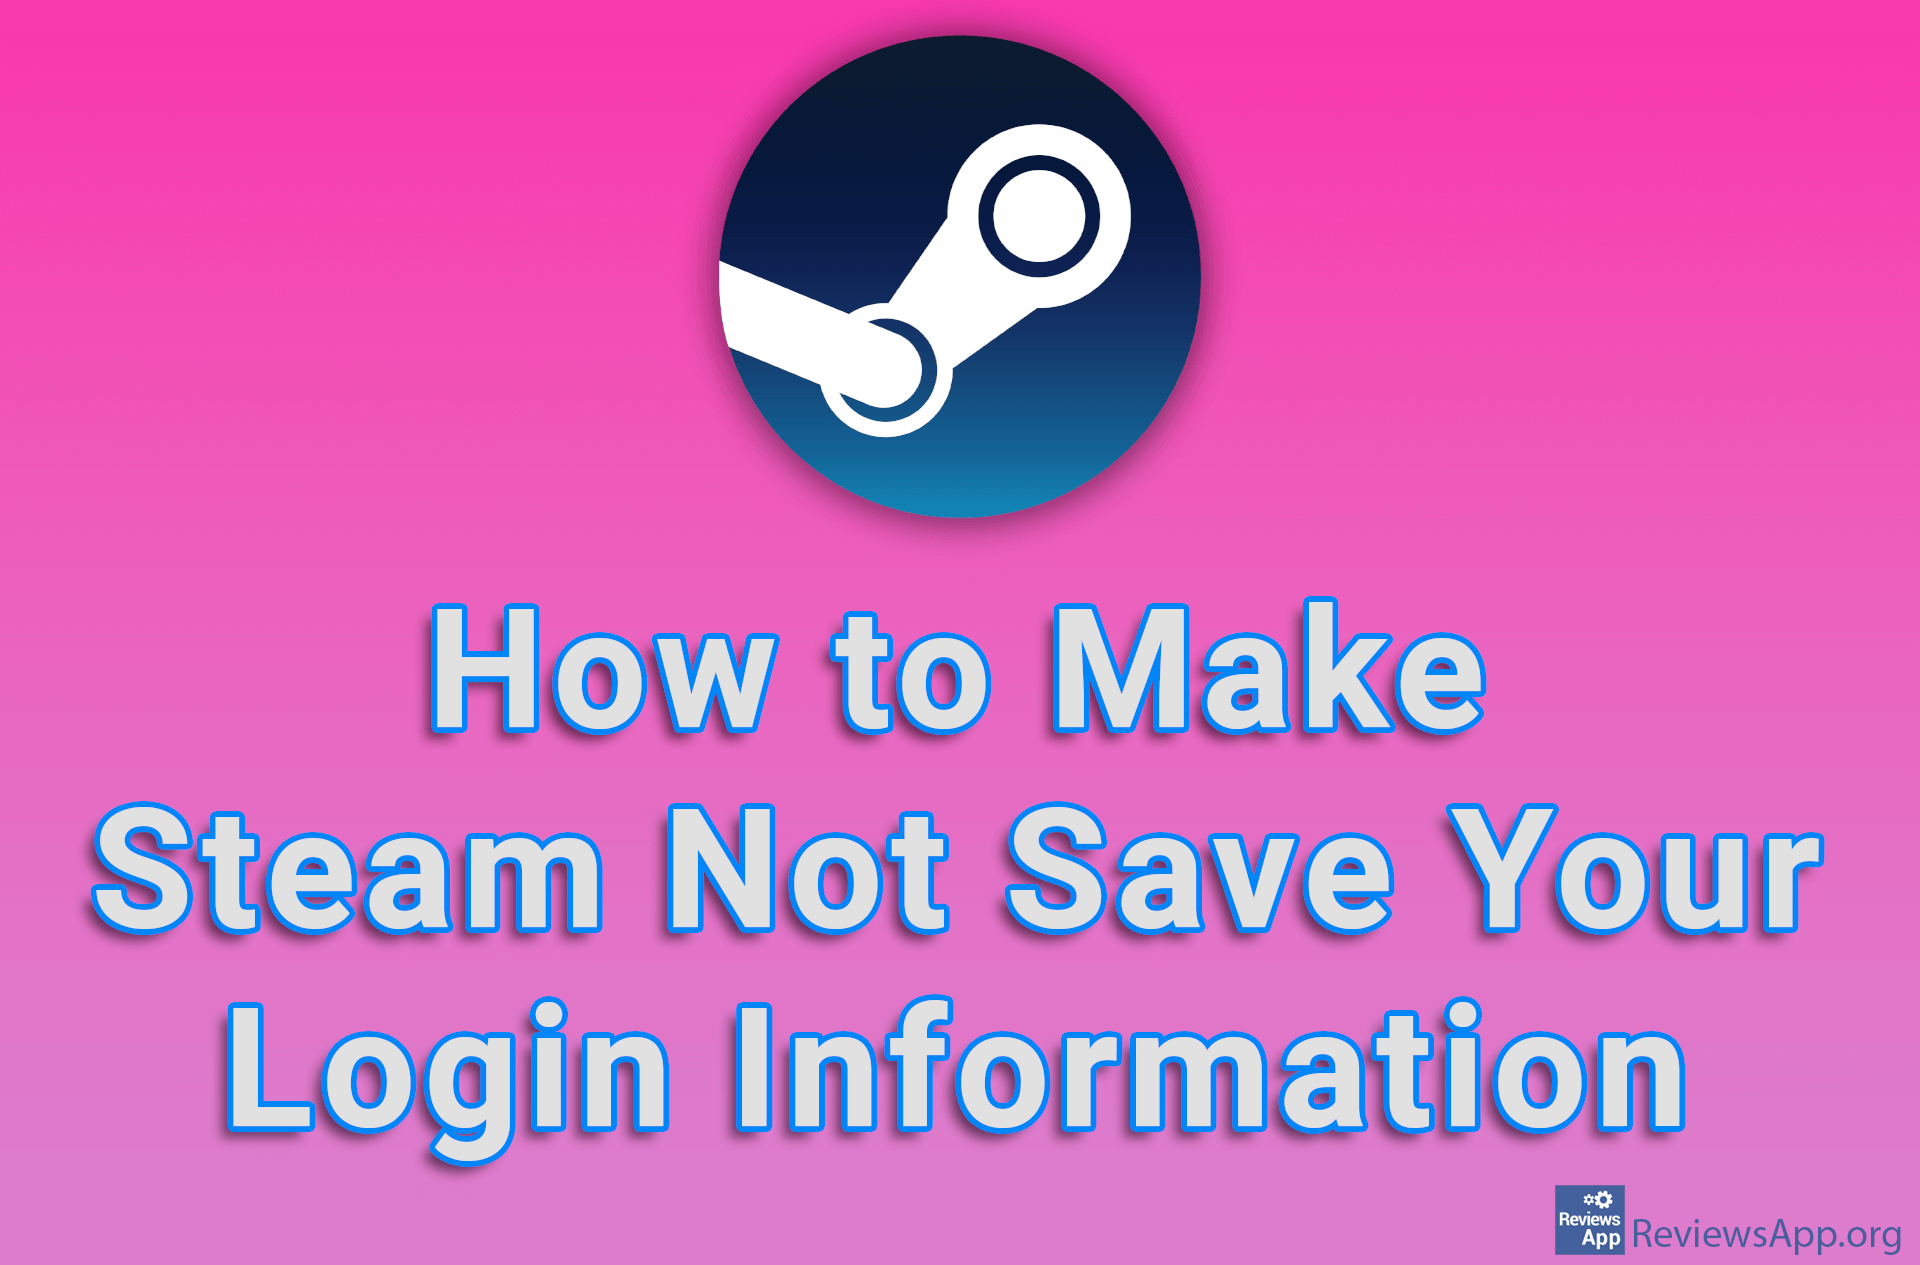 How to Make Steam Not Save Your Login Information